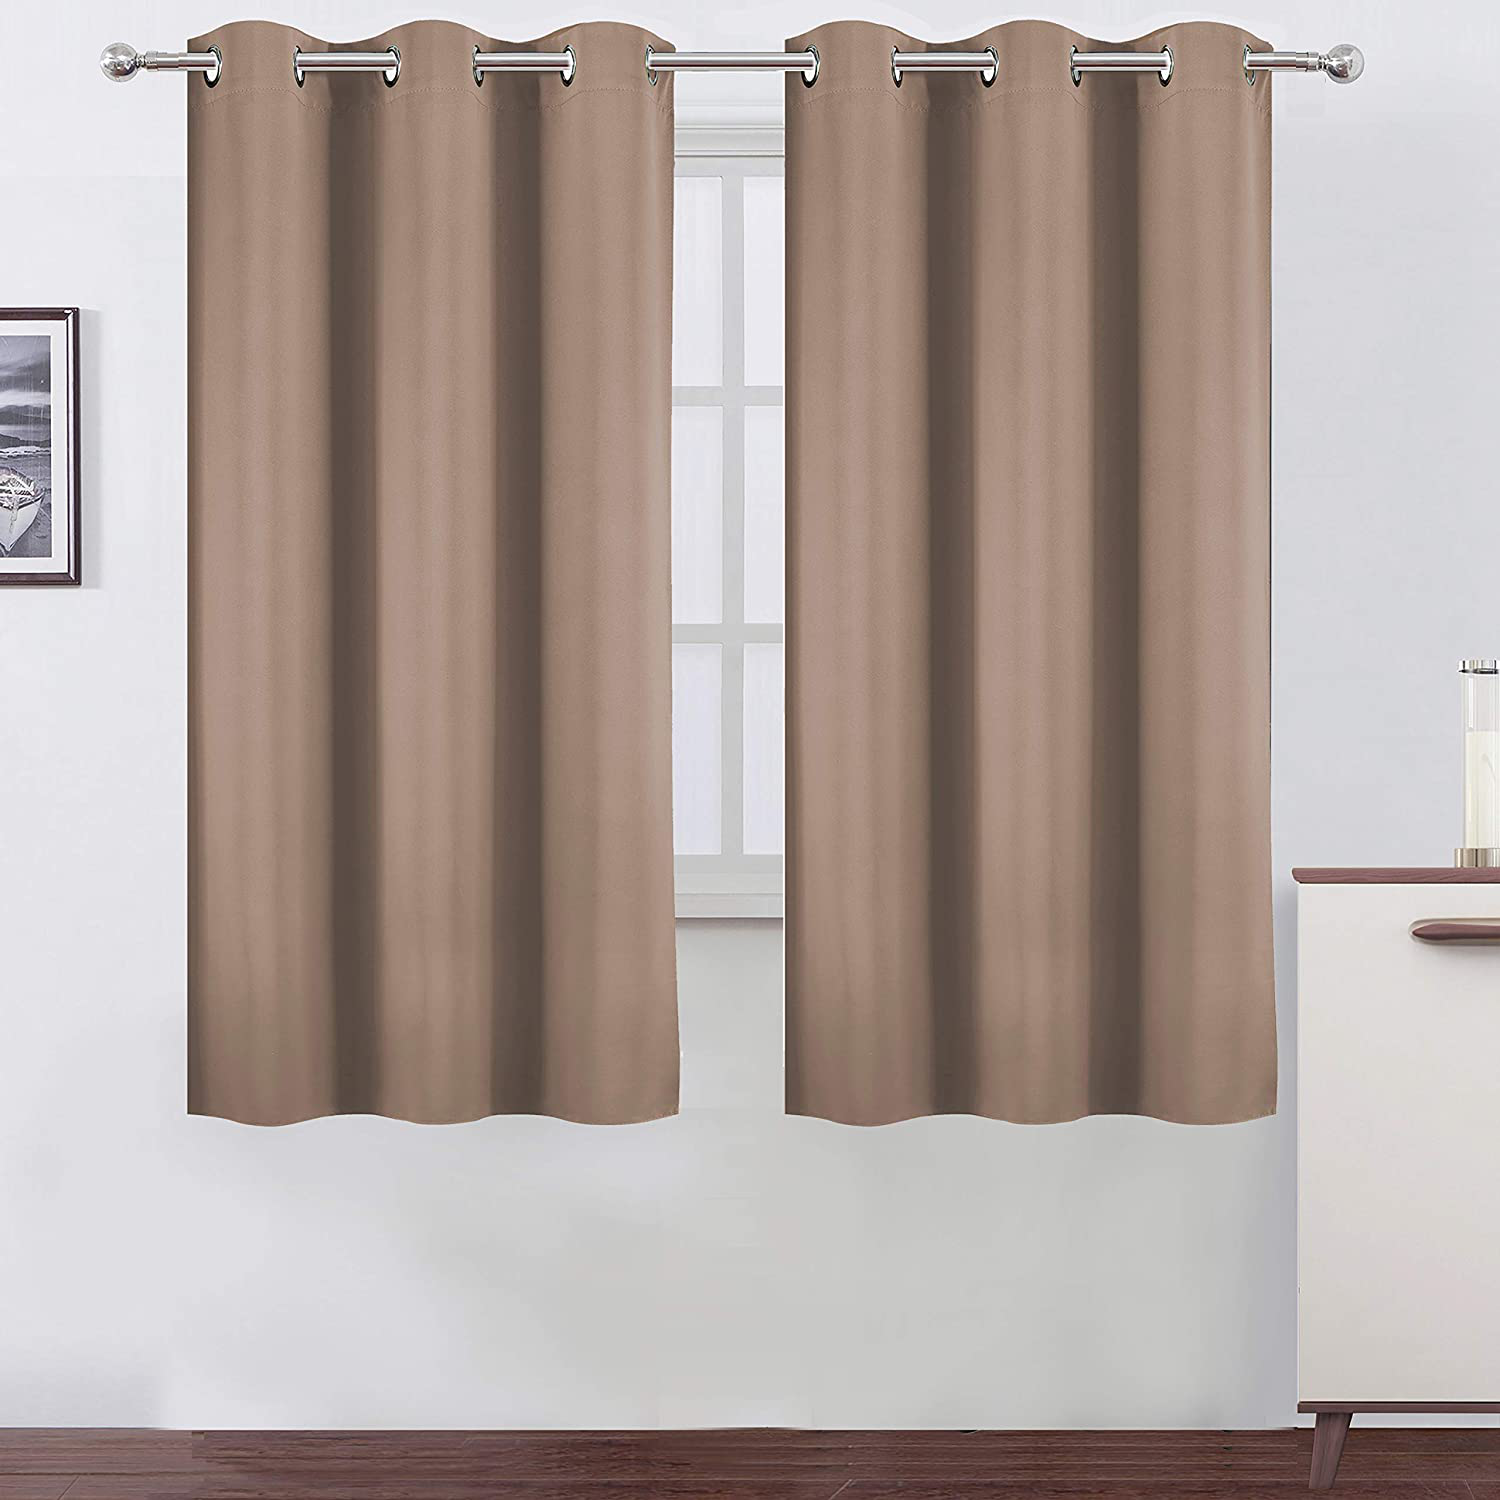 LEMOMO Cappuccino Thermal Blackout Curtains/38 x 63 Inch/Set of 2 Panels Room Darkening Curtains for Bedroom